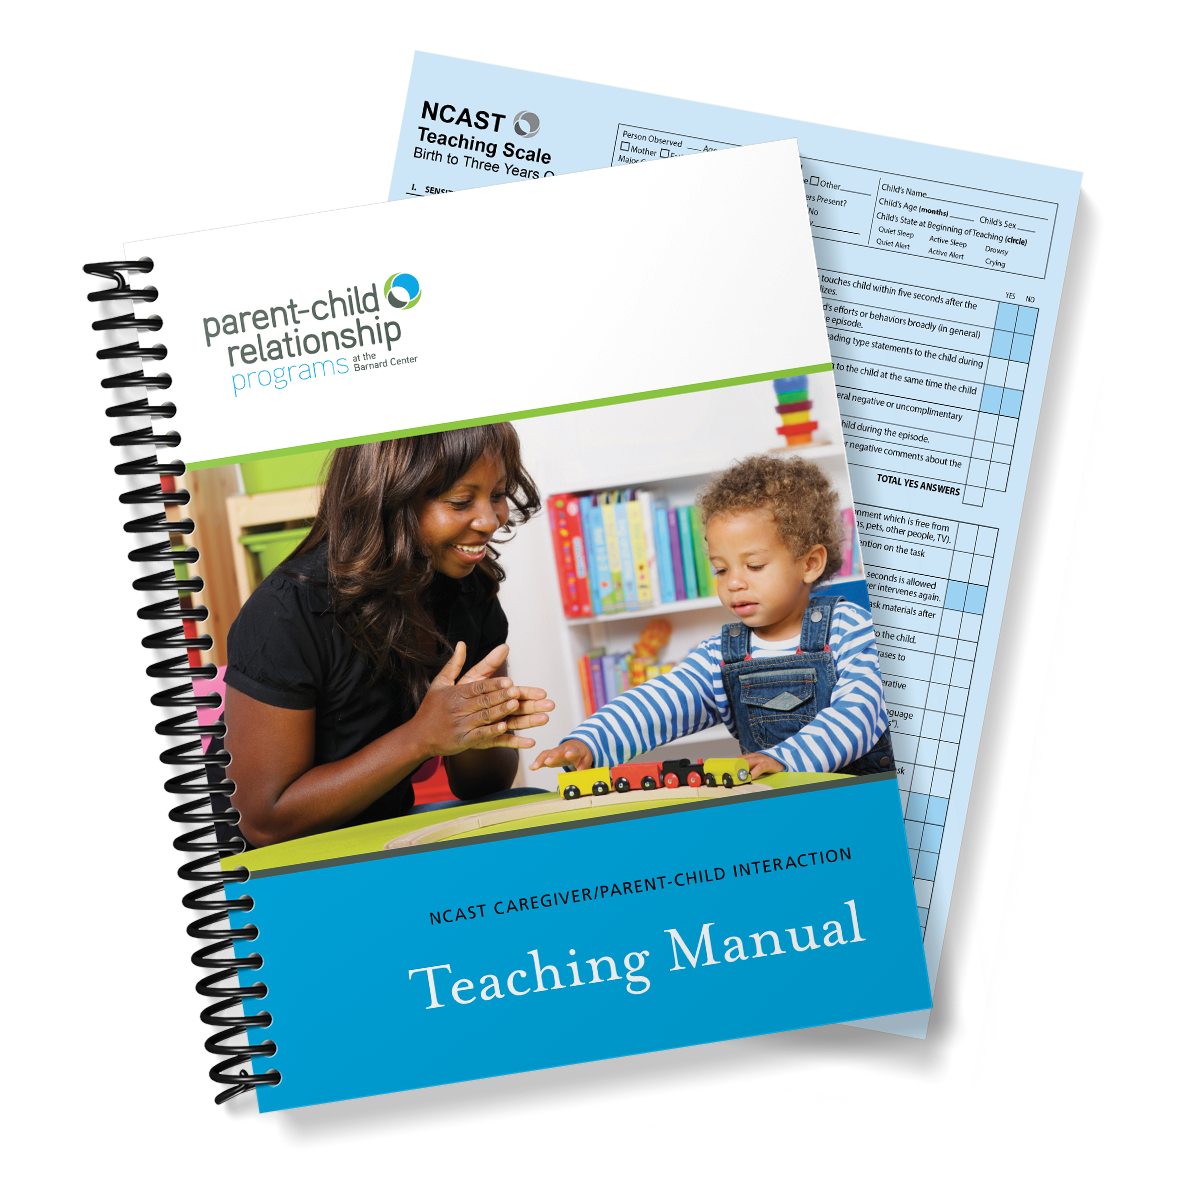 ncast-teaching-manual-cover-scale-pad-1200x1200.png